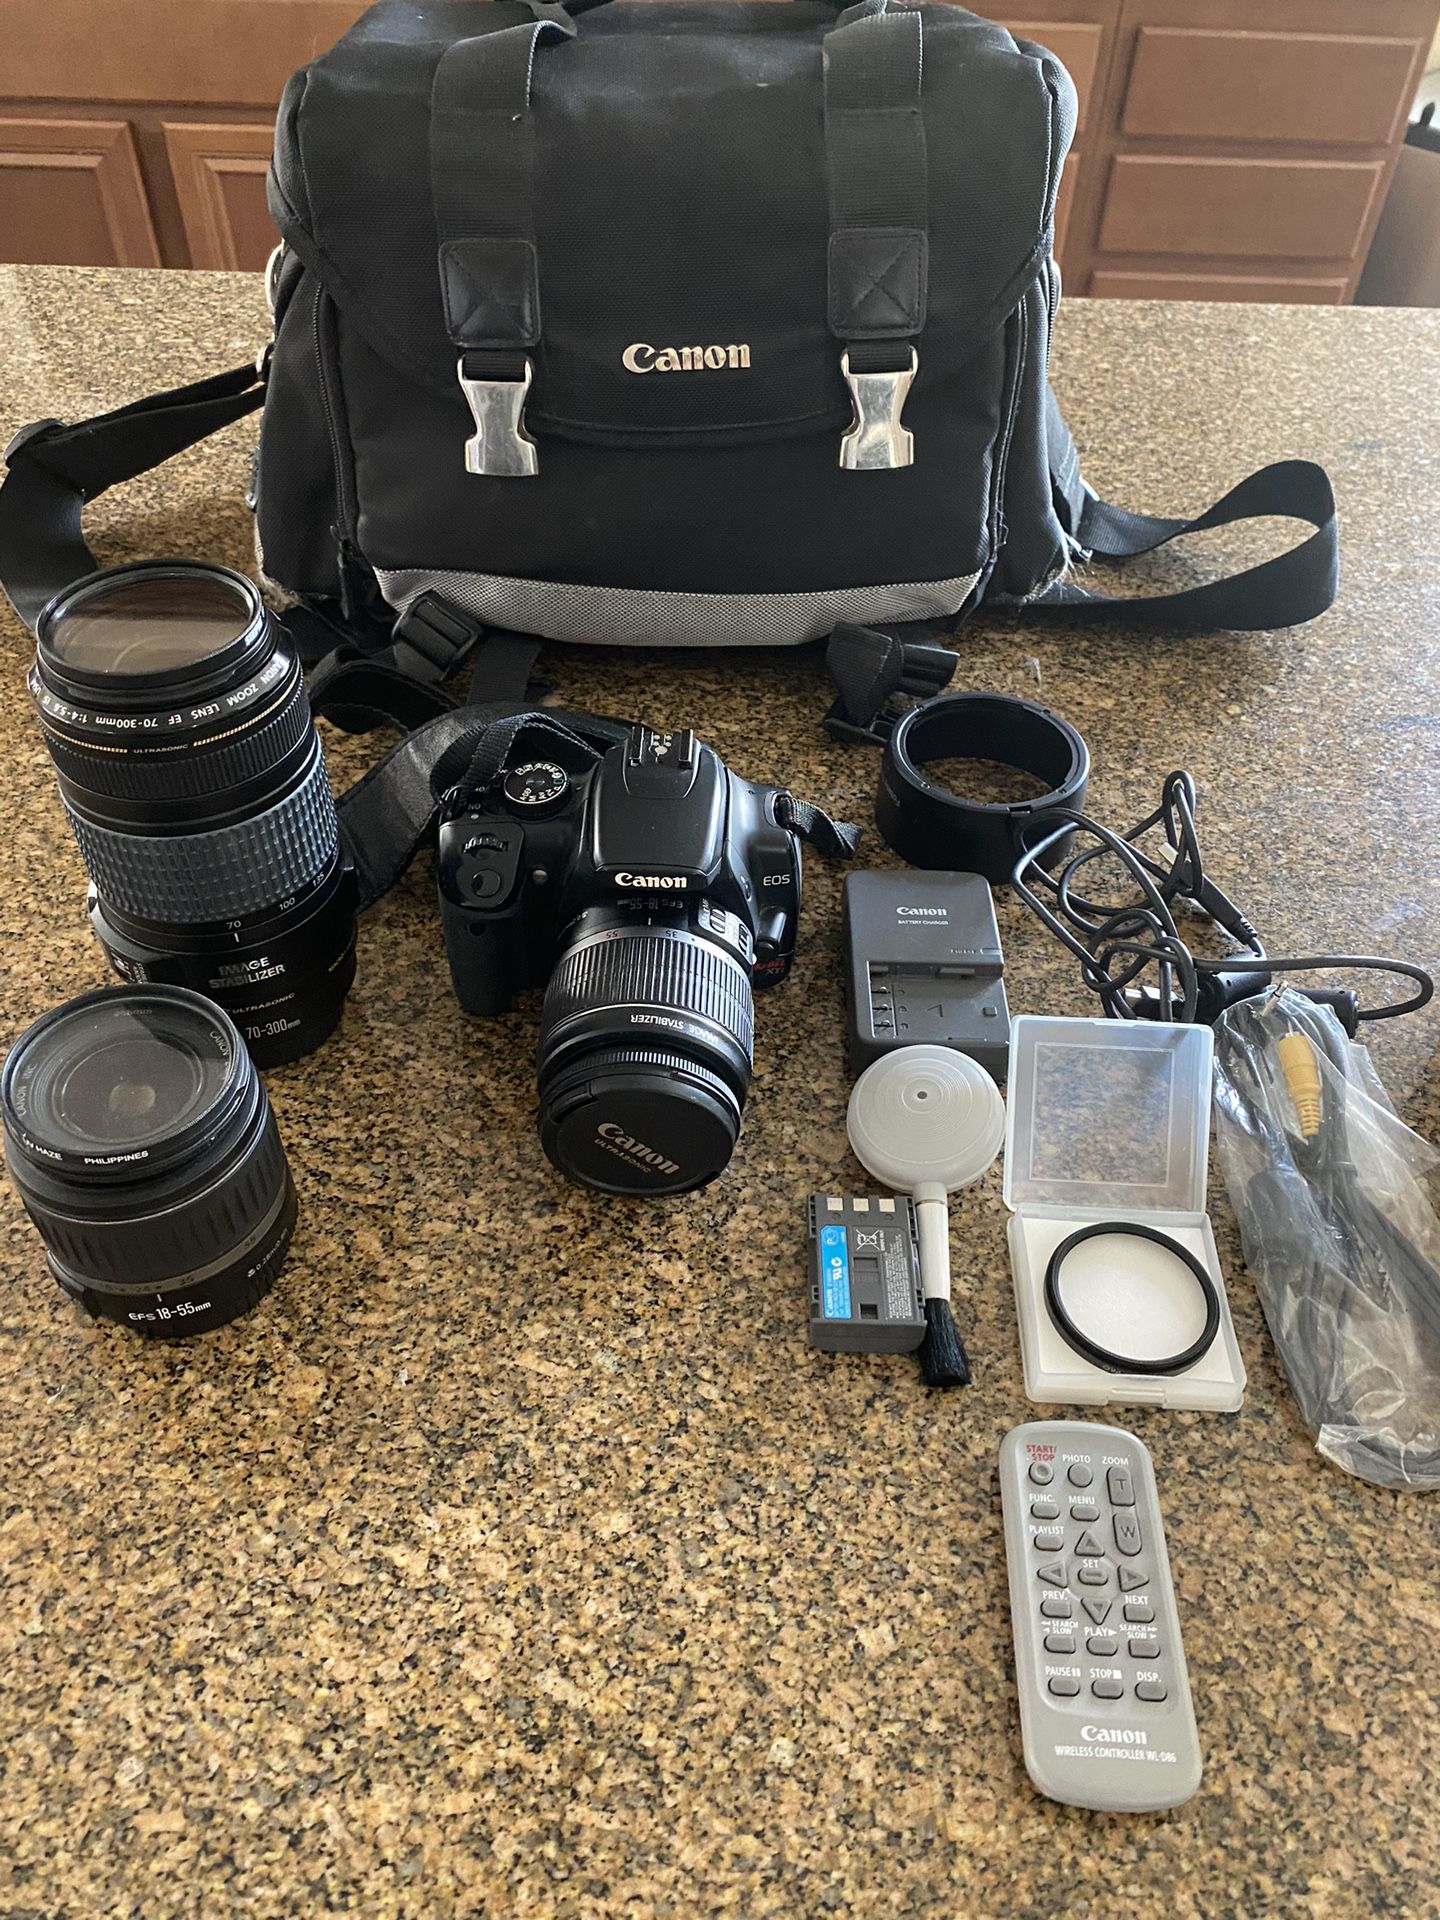 Canon Rebel XTi Camera With Lenses And Bag